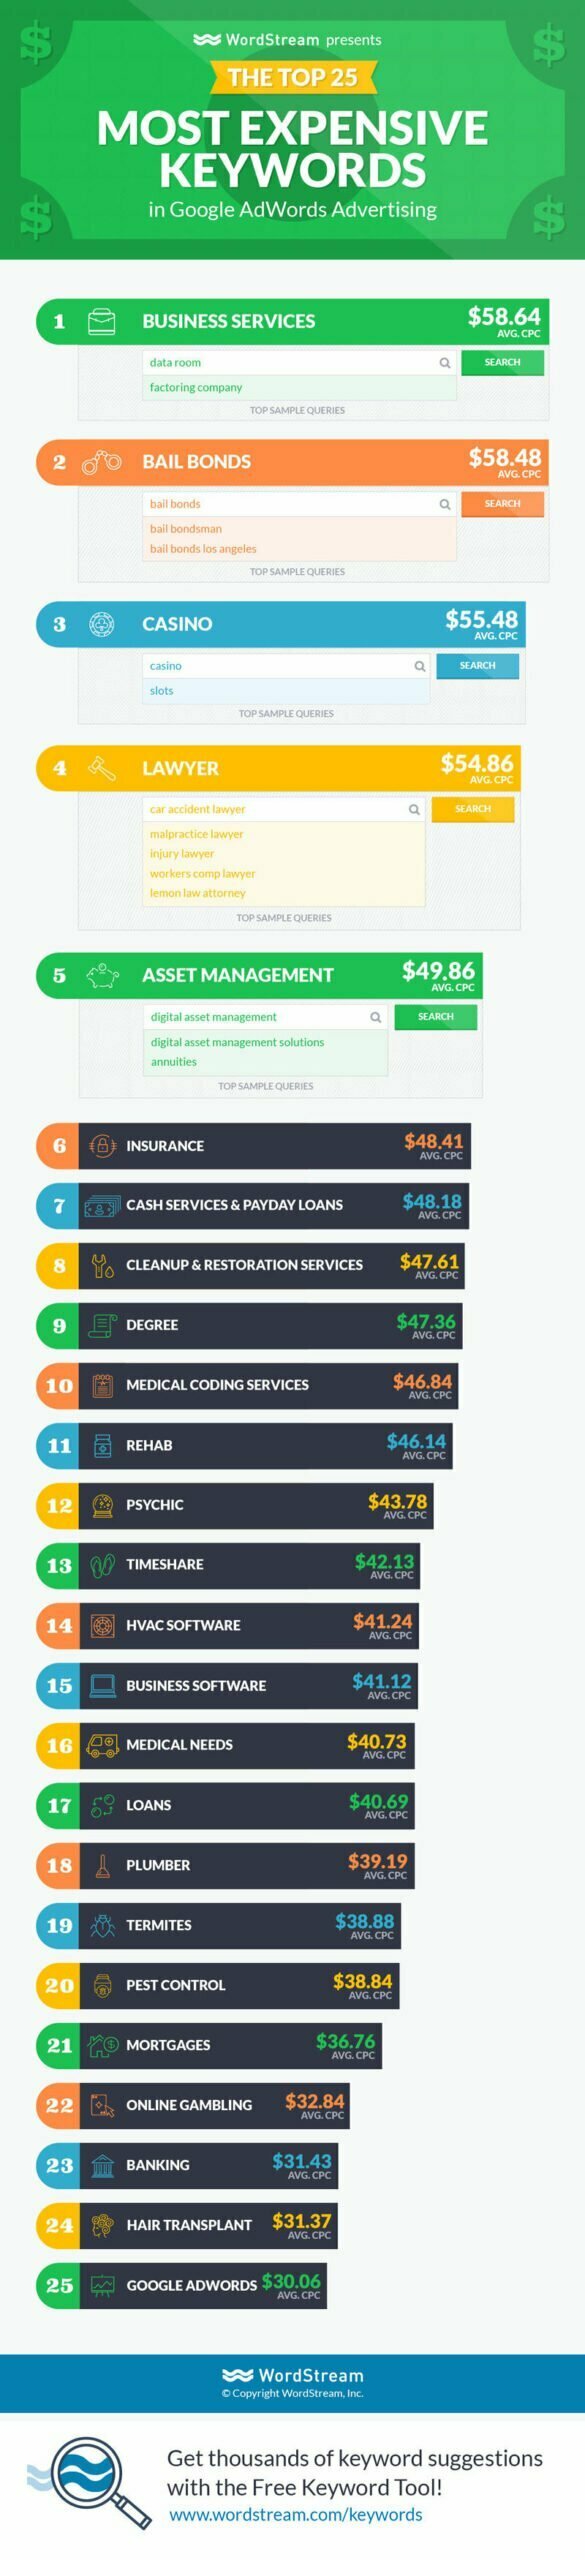 most expensive keywords in google adwords